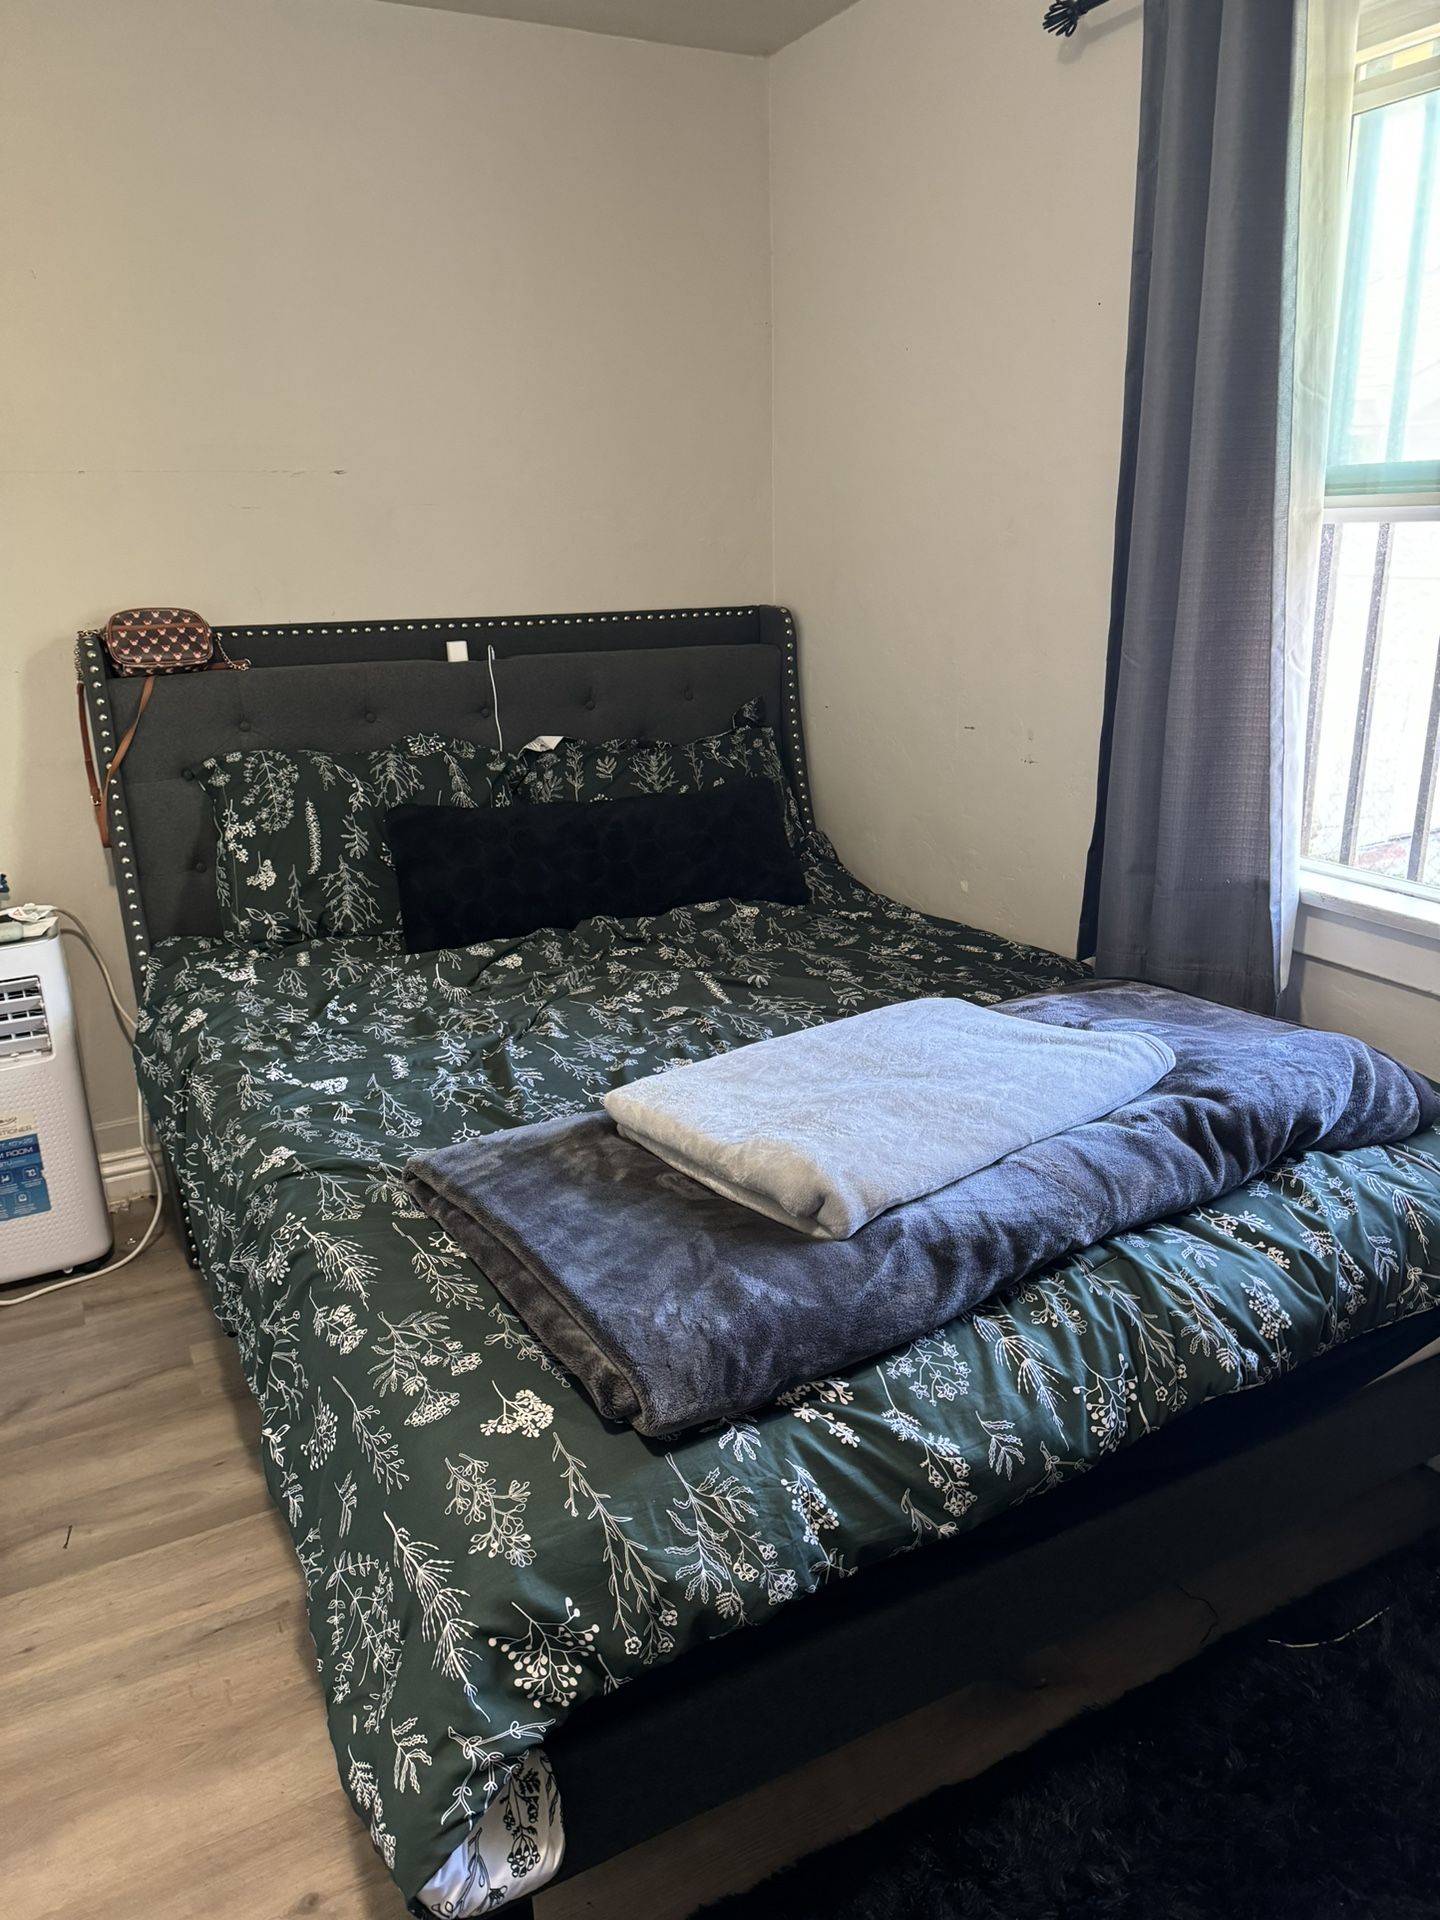 Bed Frame with Mattress